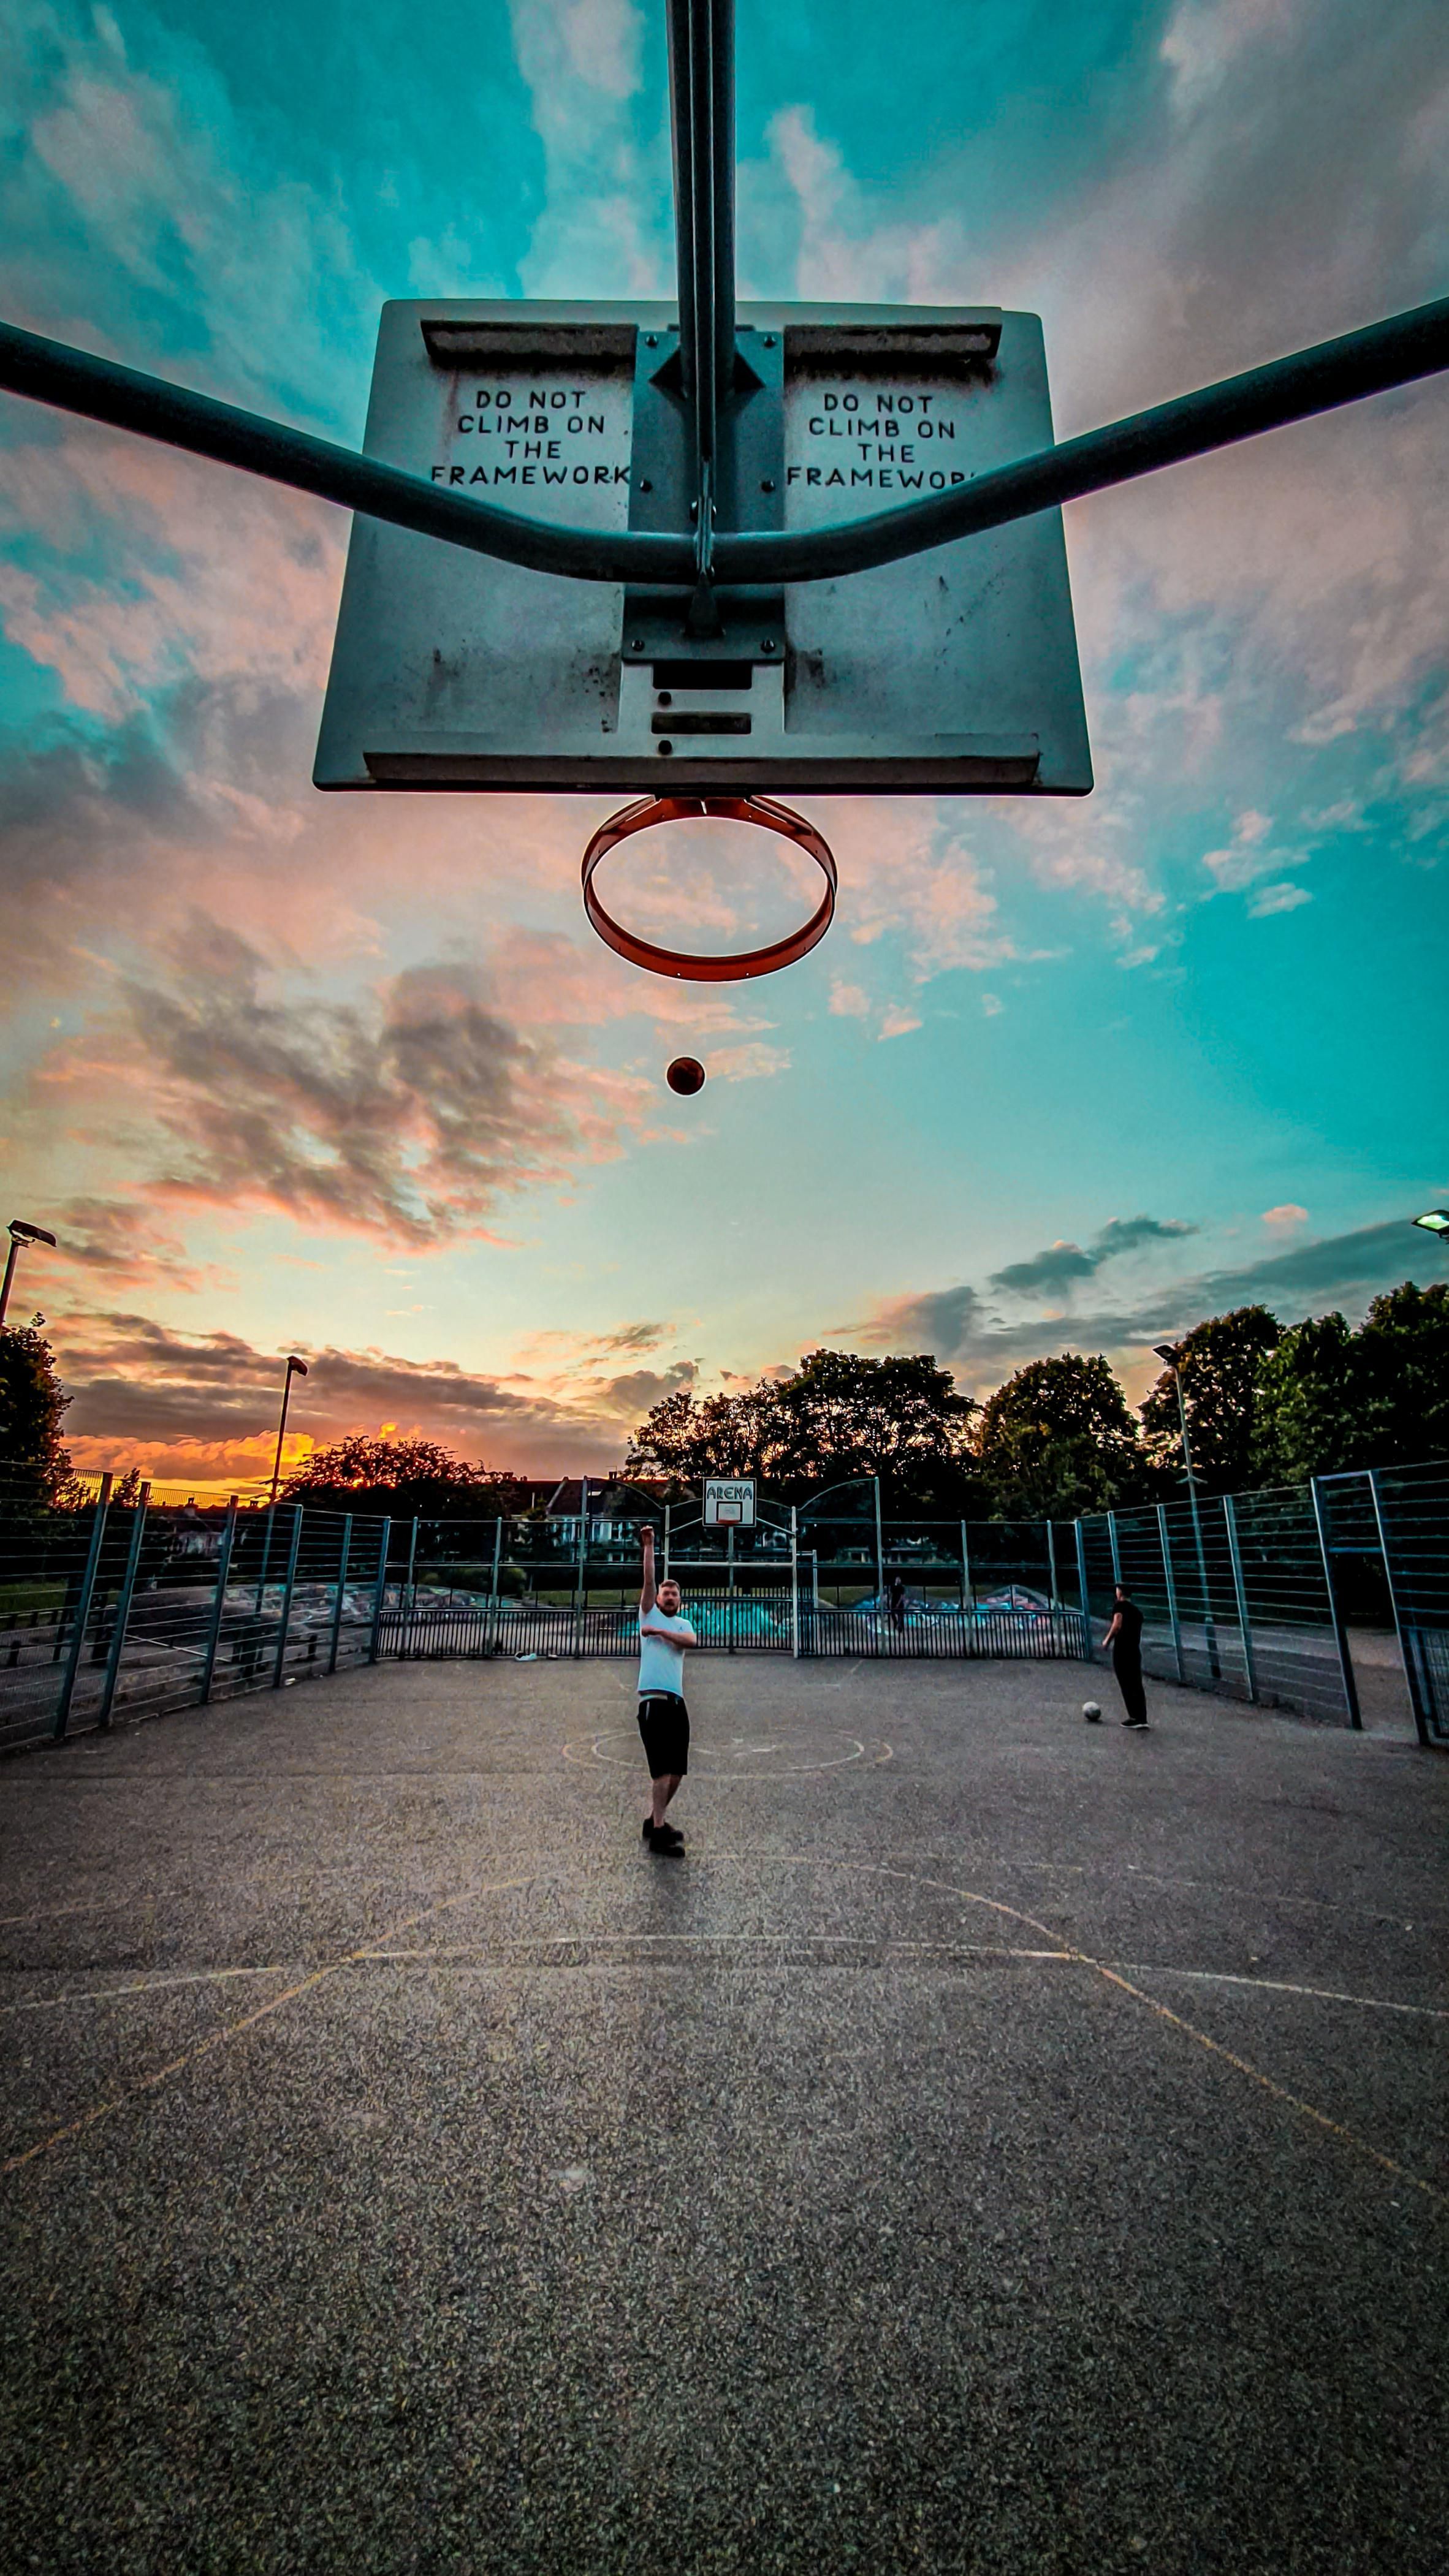 A person is playing basketball in the park - Basketball